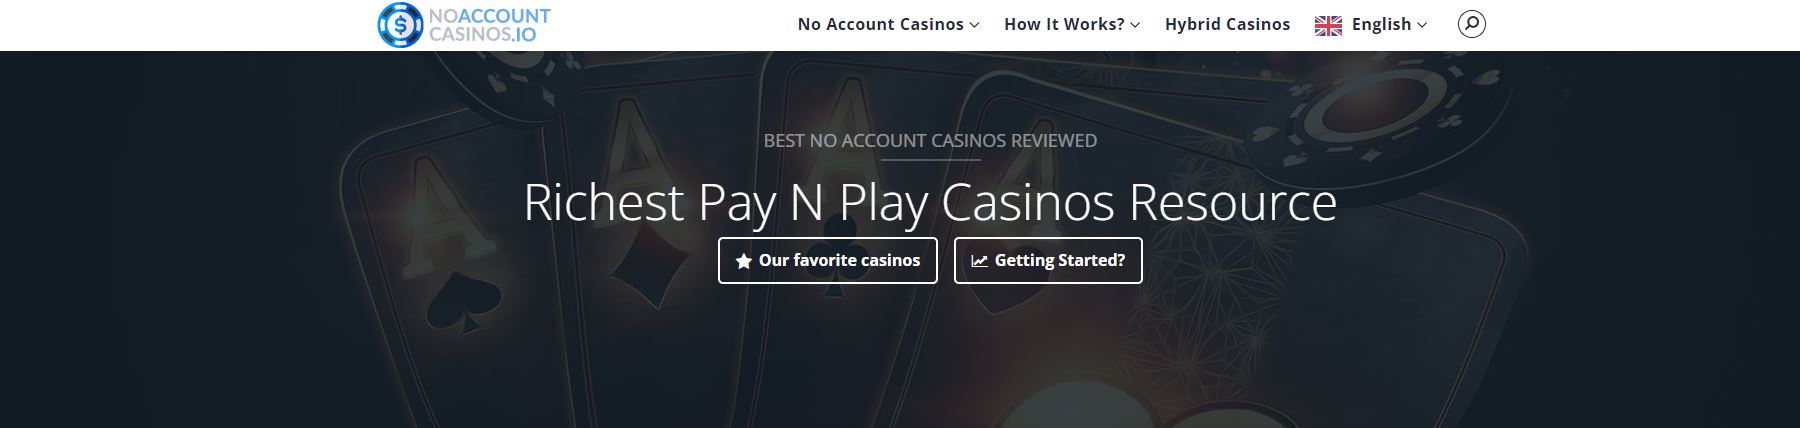 no account casinos fast payout